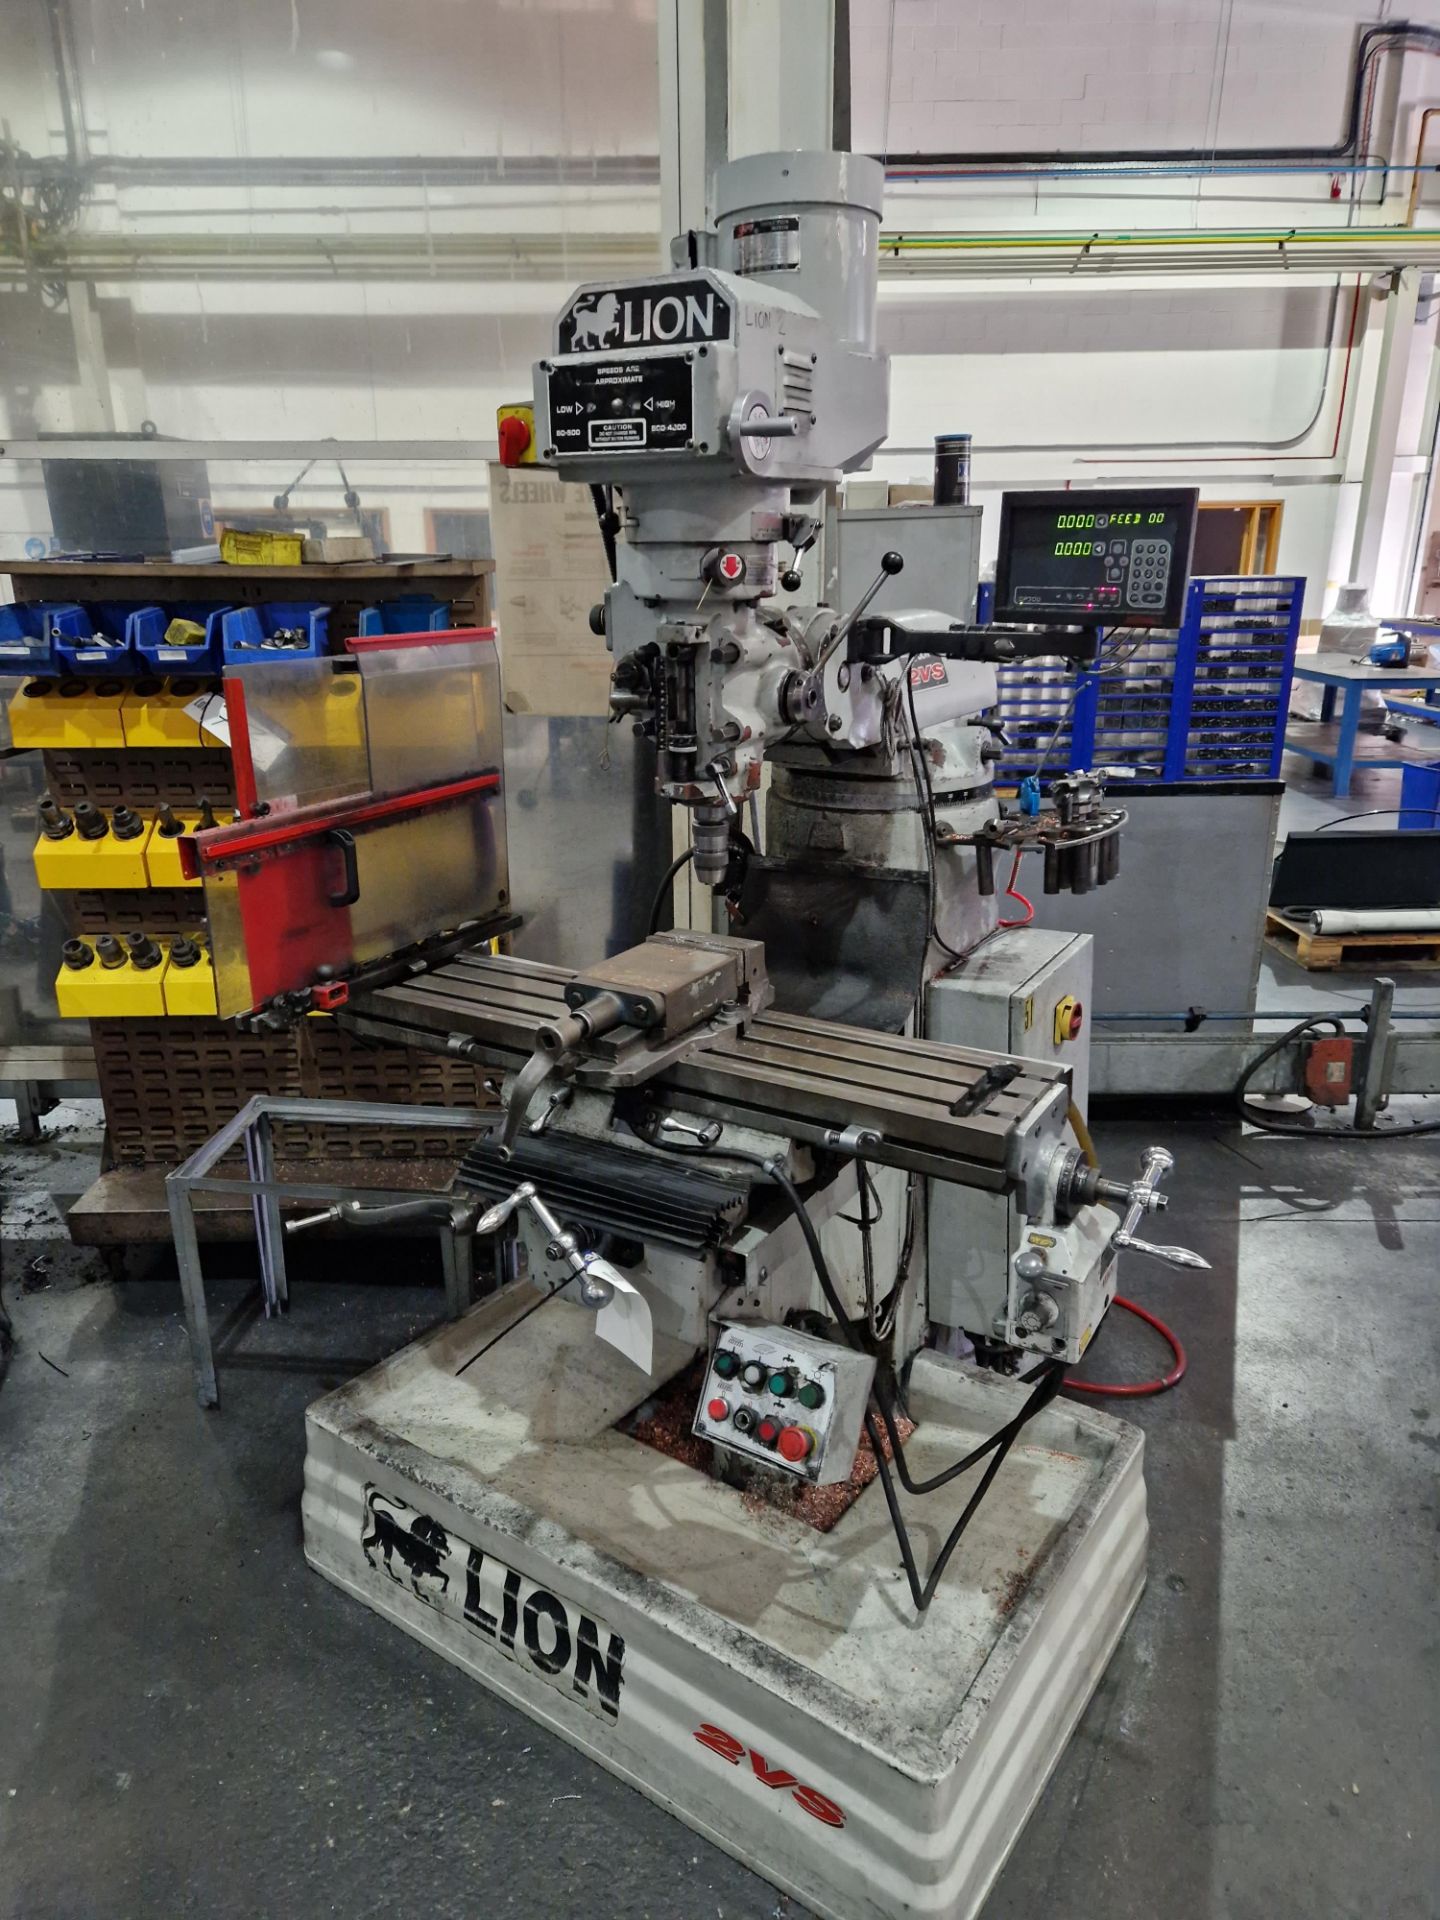 LION 2VS Universal Head Milling Machine with NEWALL DP 700 Digital Read Out, c/w Machine Vice, 2